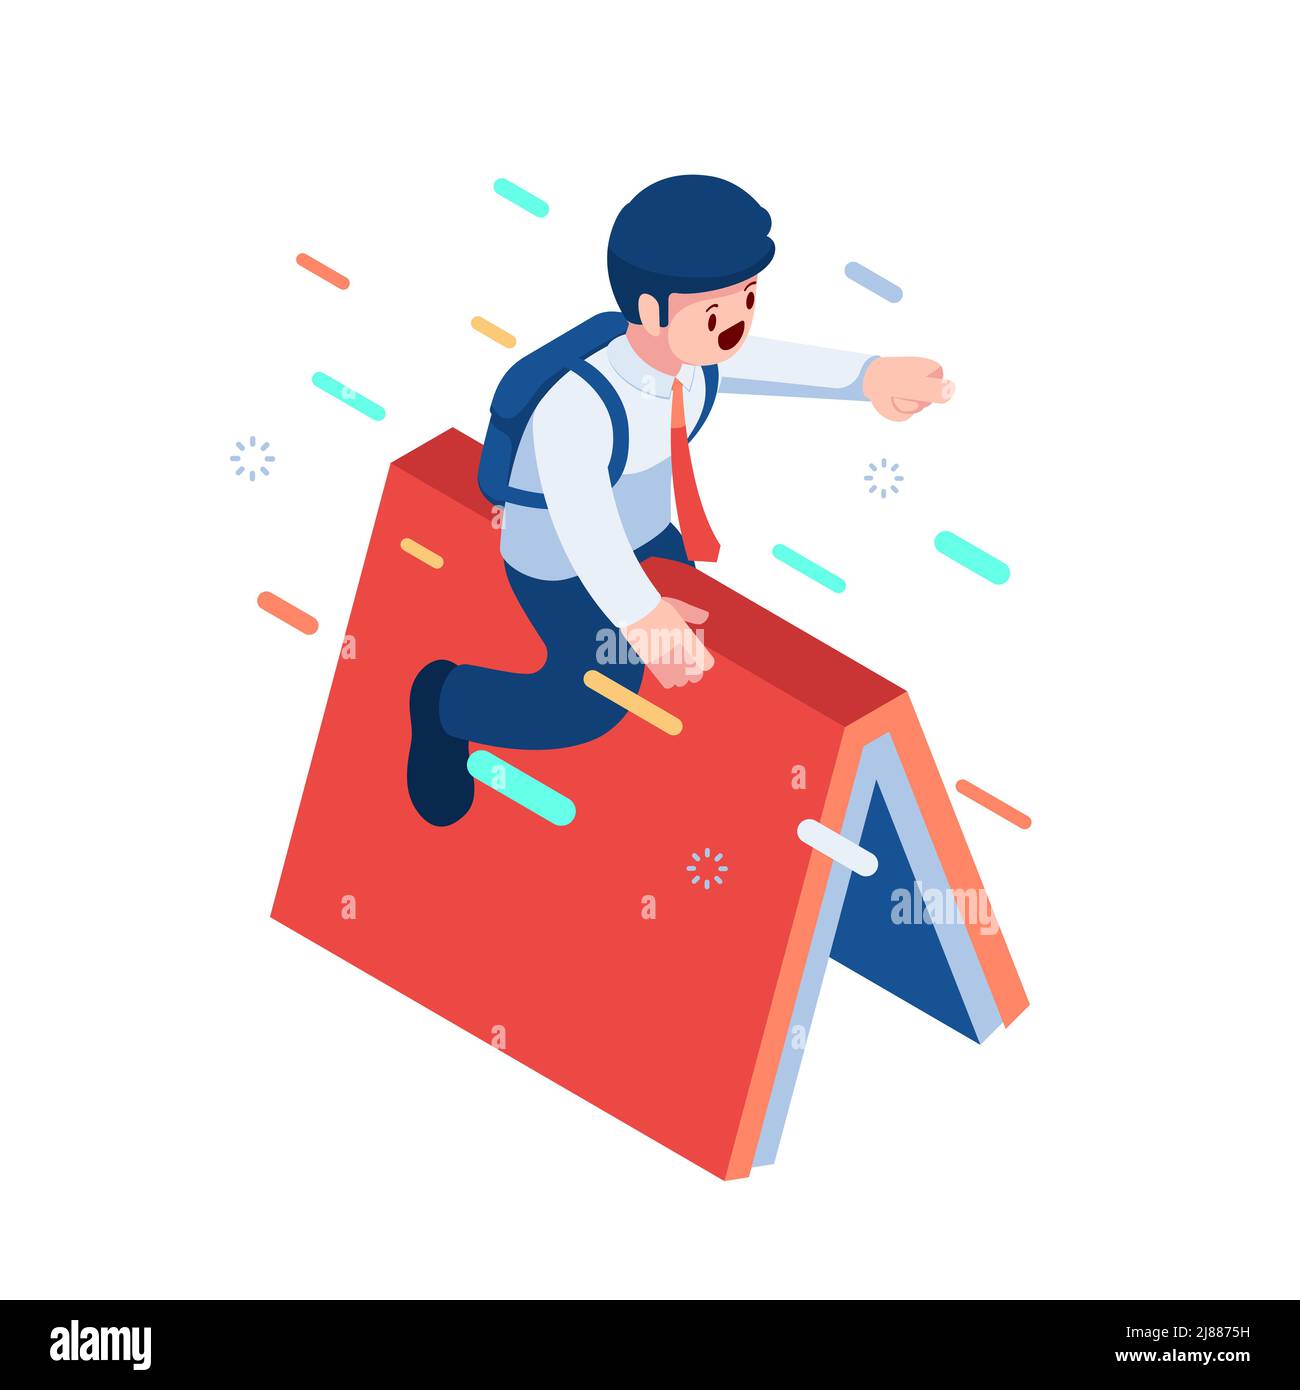 Flat 3d Isometric Businessman Riding Flying Book. Back to School and Education Concept. Stock Vector